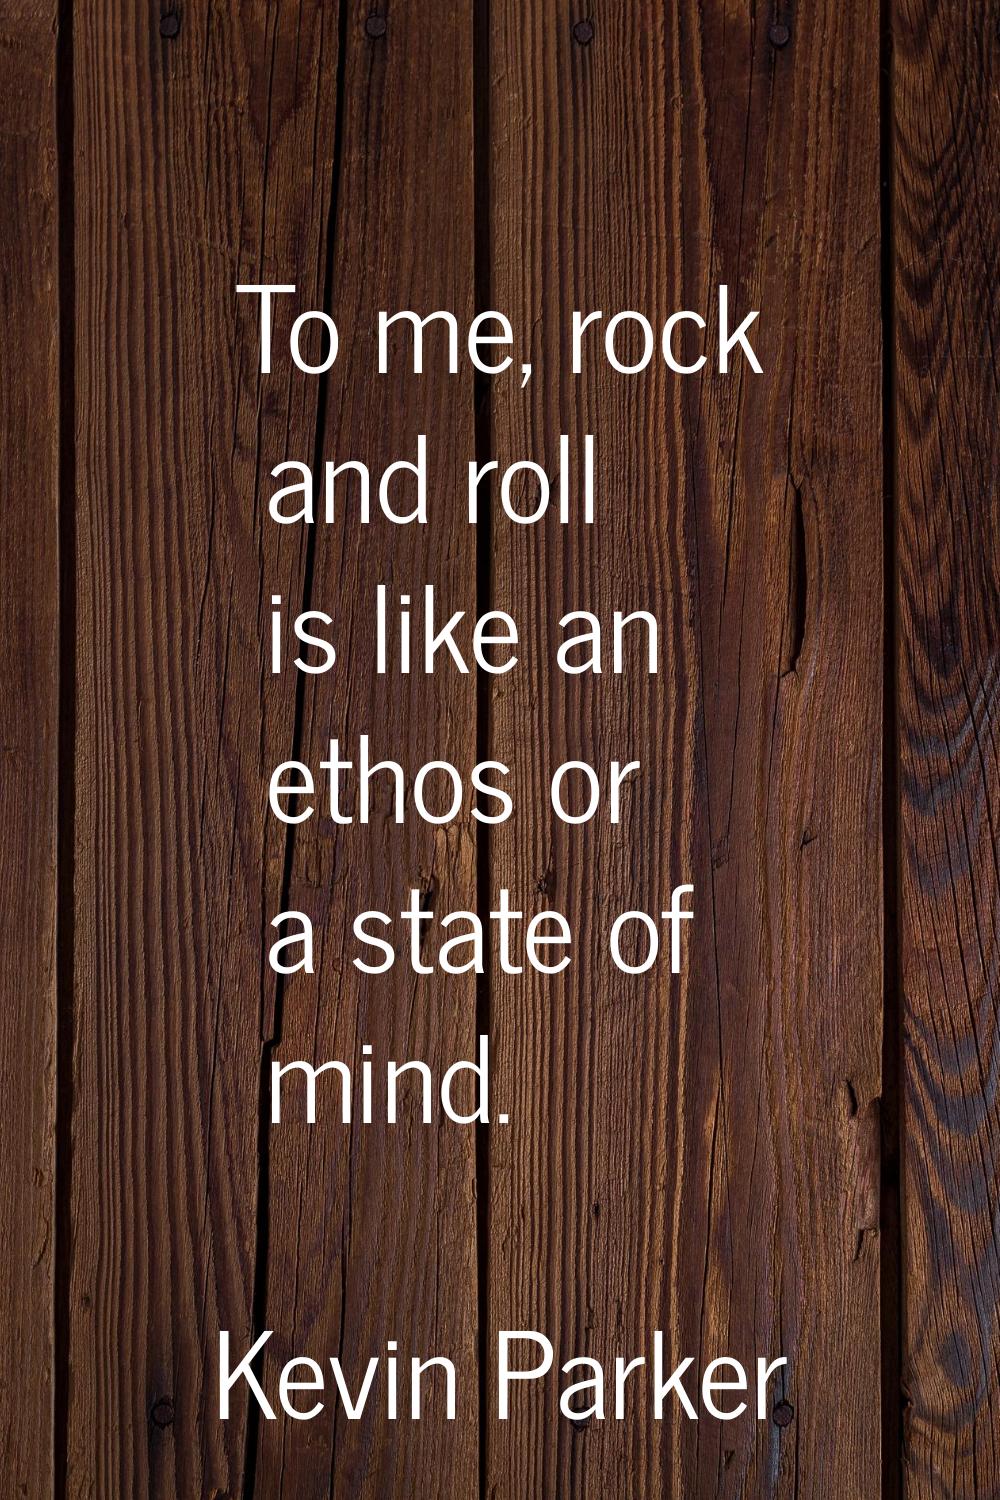 To me, rock and roll is like an ethos or a state of mind.